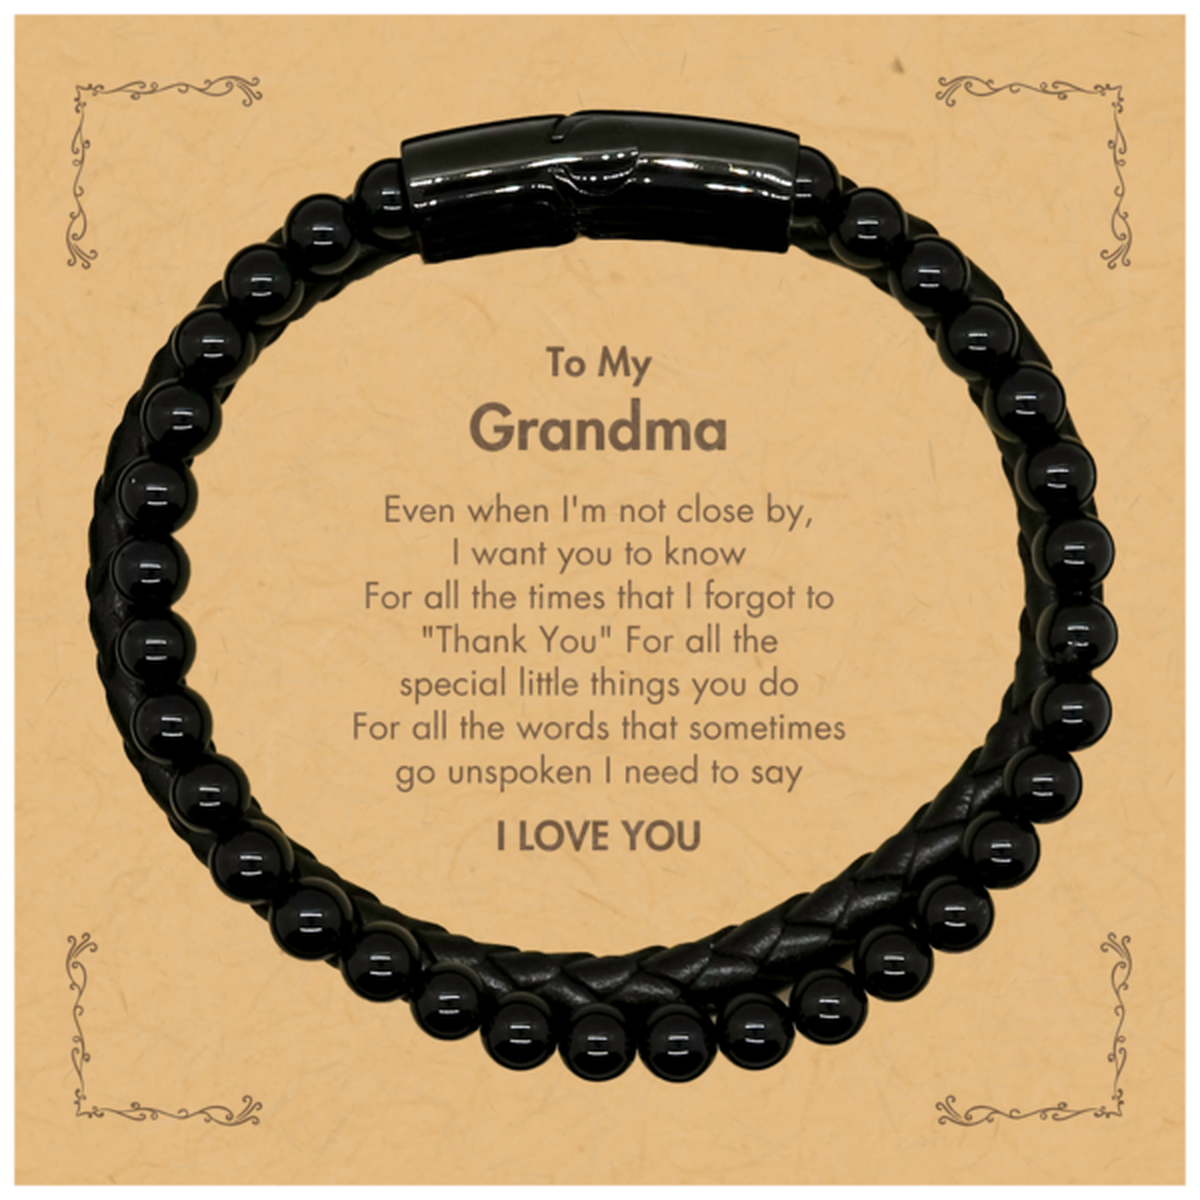 Thank You Gifts for Grandma, Keepsake Stone Leather Bracelets Gifts for Grandma Birthday Mother's day Father's Day Grandma For all the words That sometimes go unspoken I need to say I LOVE YOU